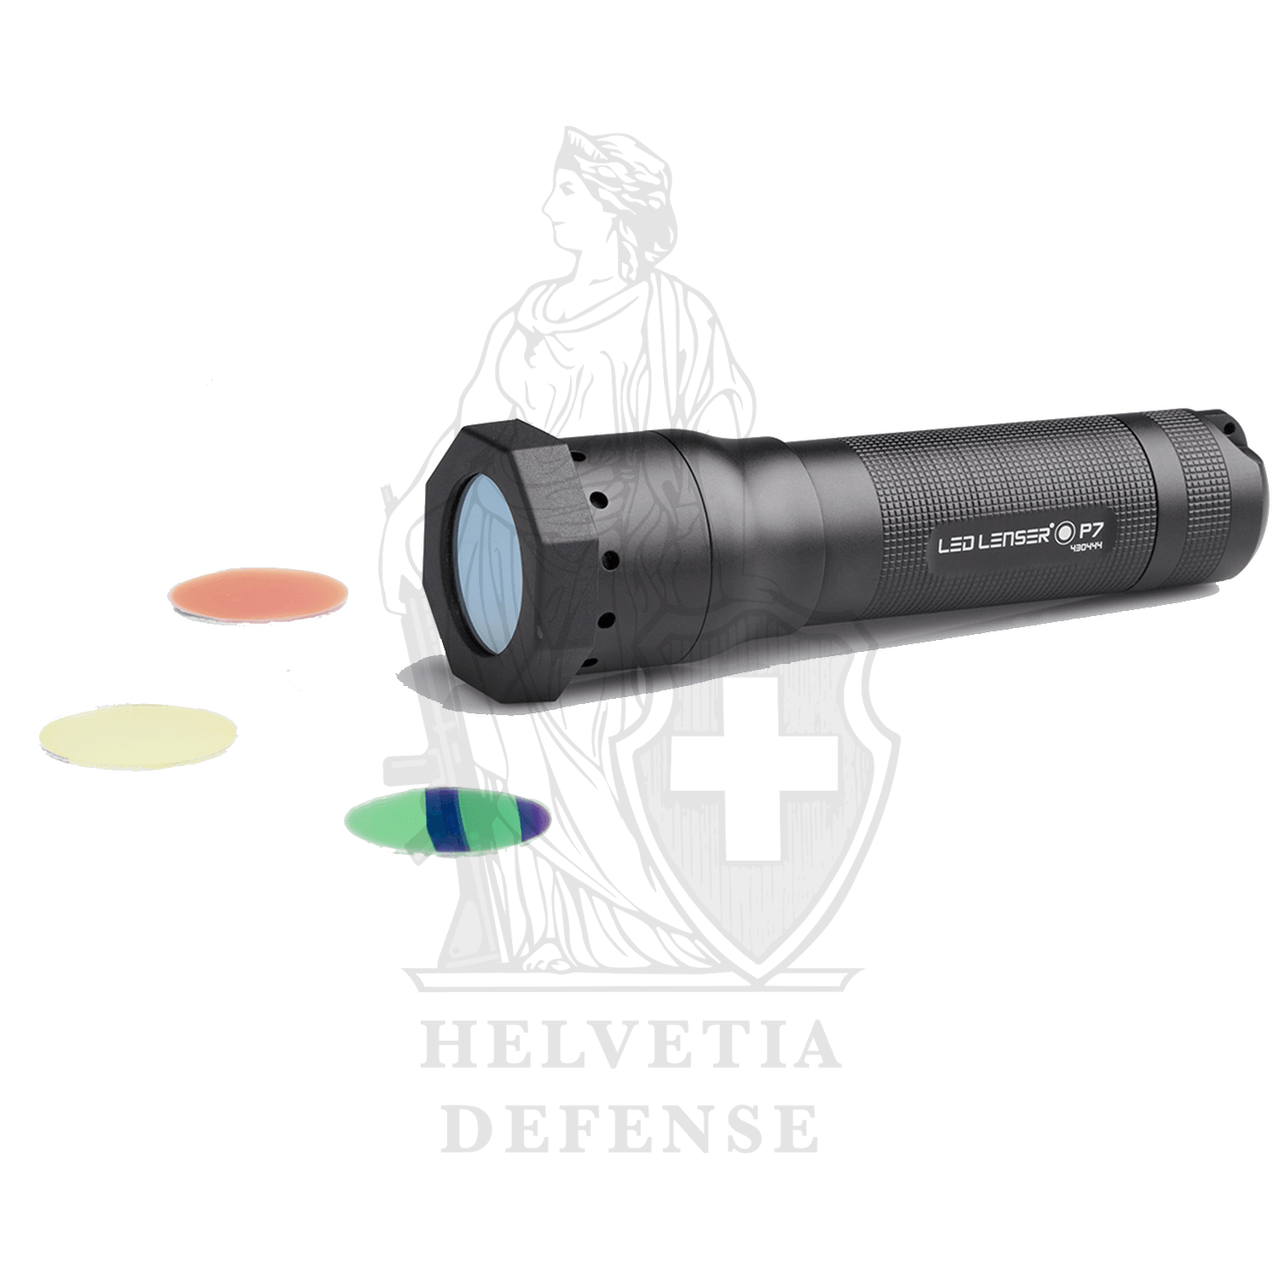 LENSER Flashlight P7 QC - Updated Features and - High/Low/Off Settings - Advanced Focus System - Durable Anodized Aluminum Casing - LED Chip - Perfect for Outdoor Activities